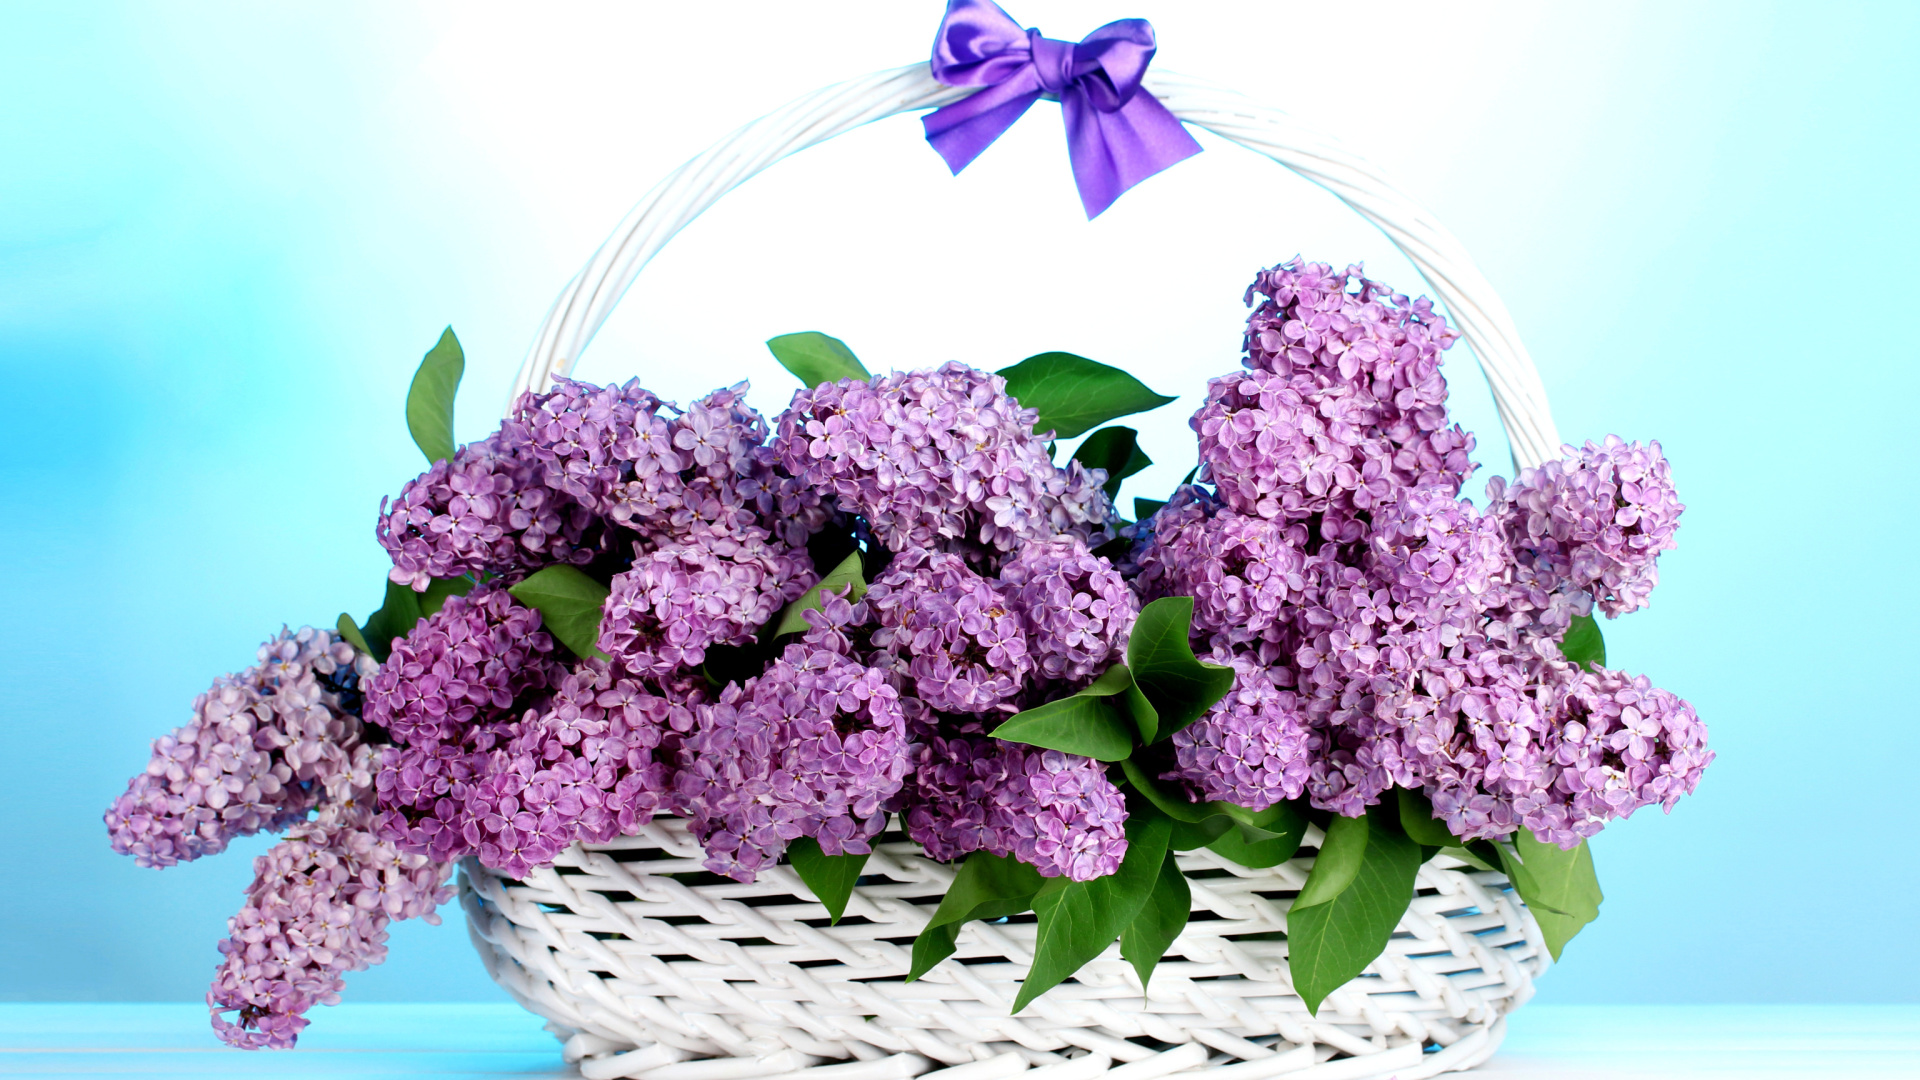 Baskets with lilac flowers wallpaper 1920x1080